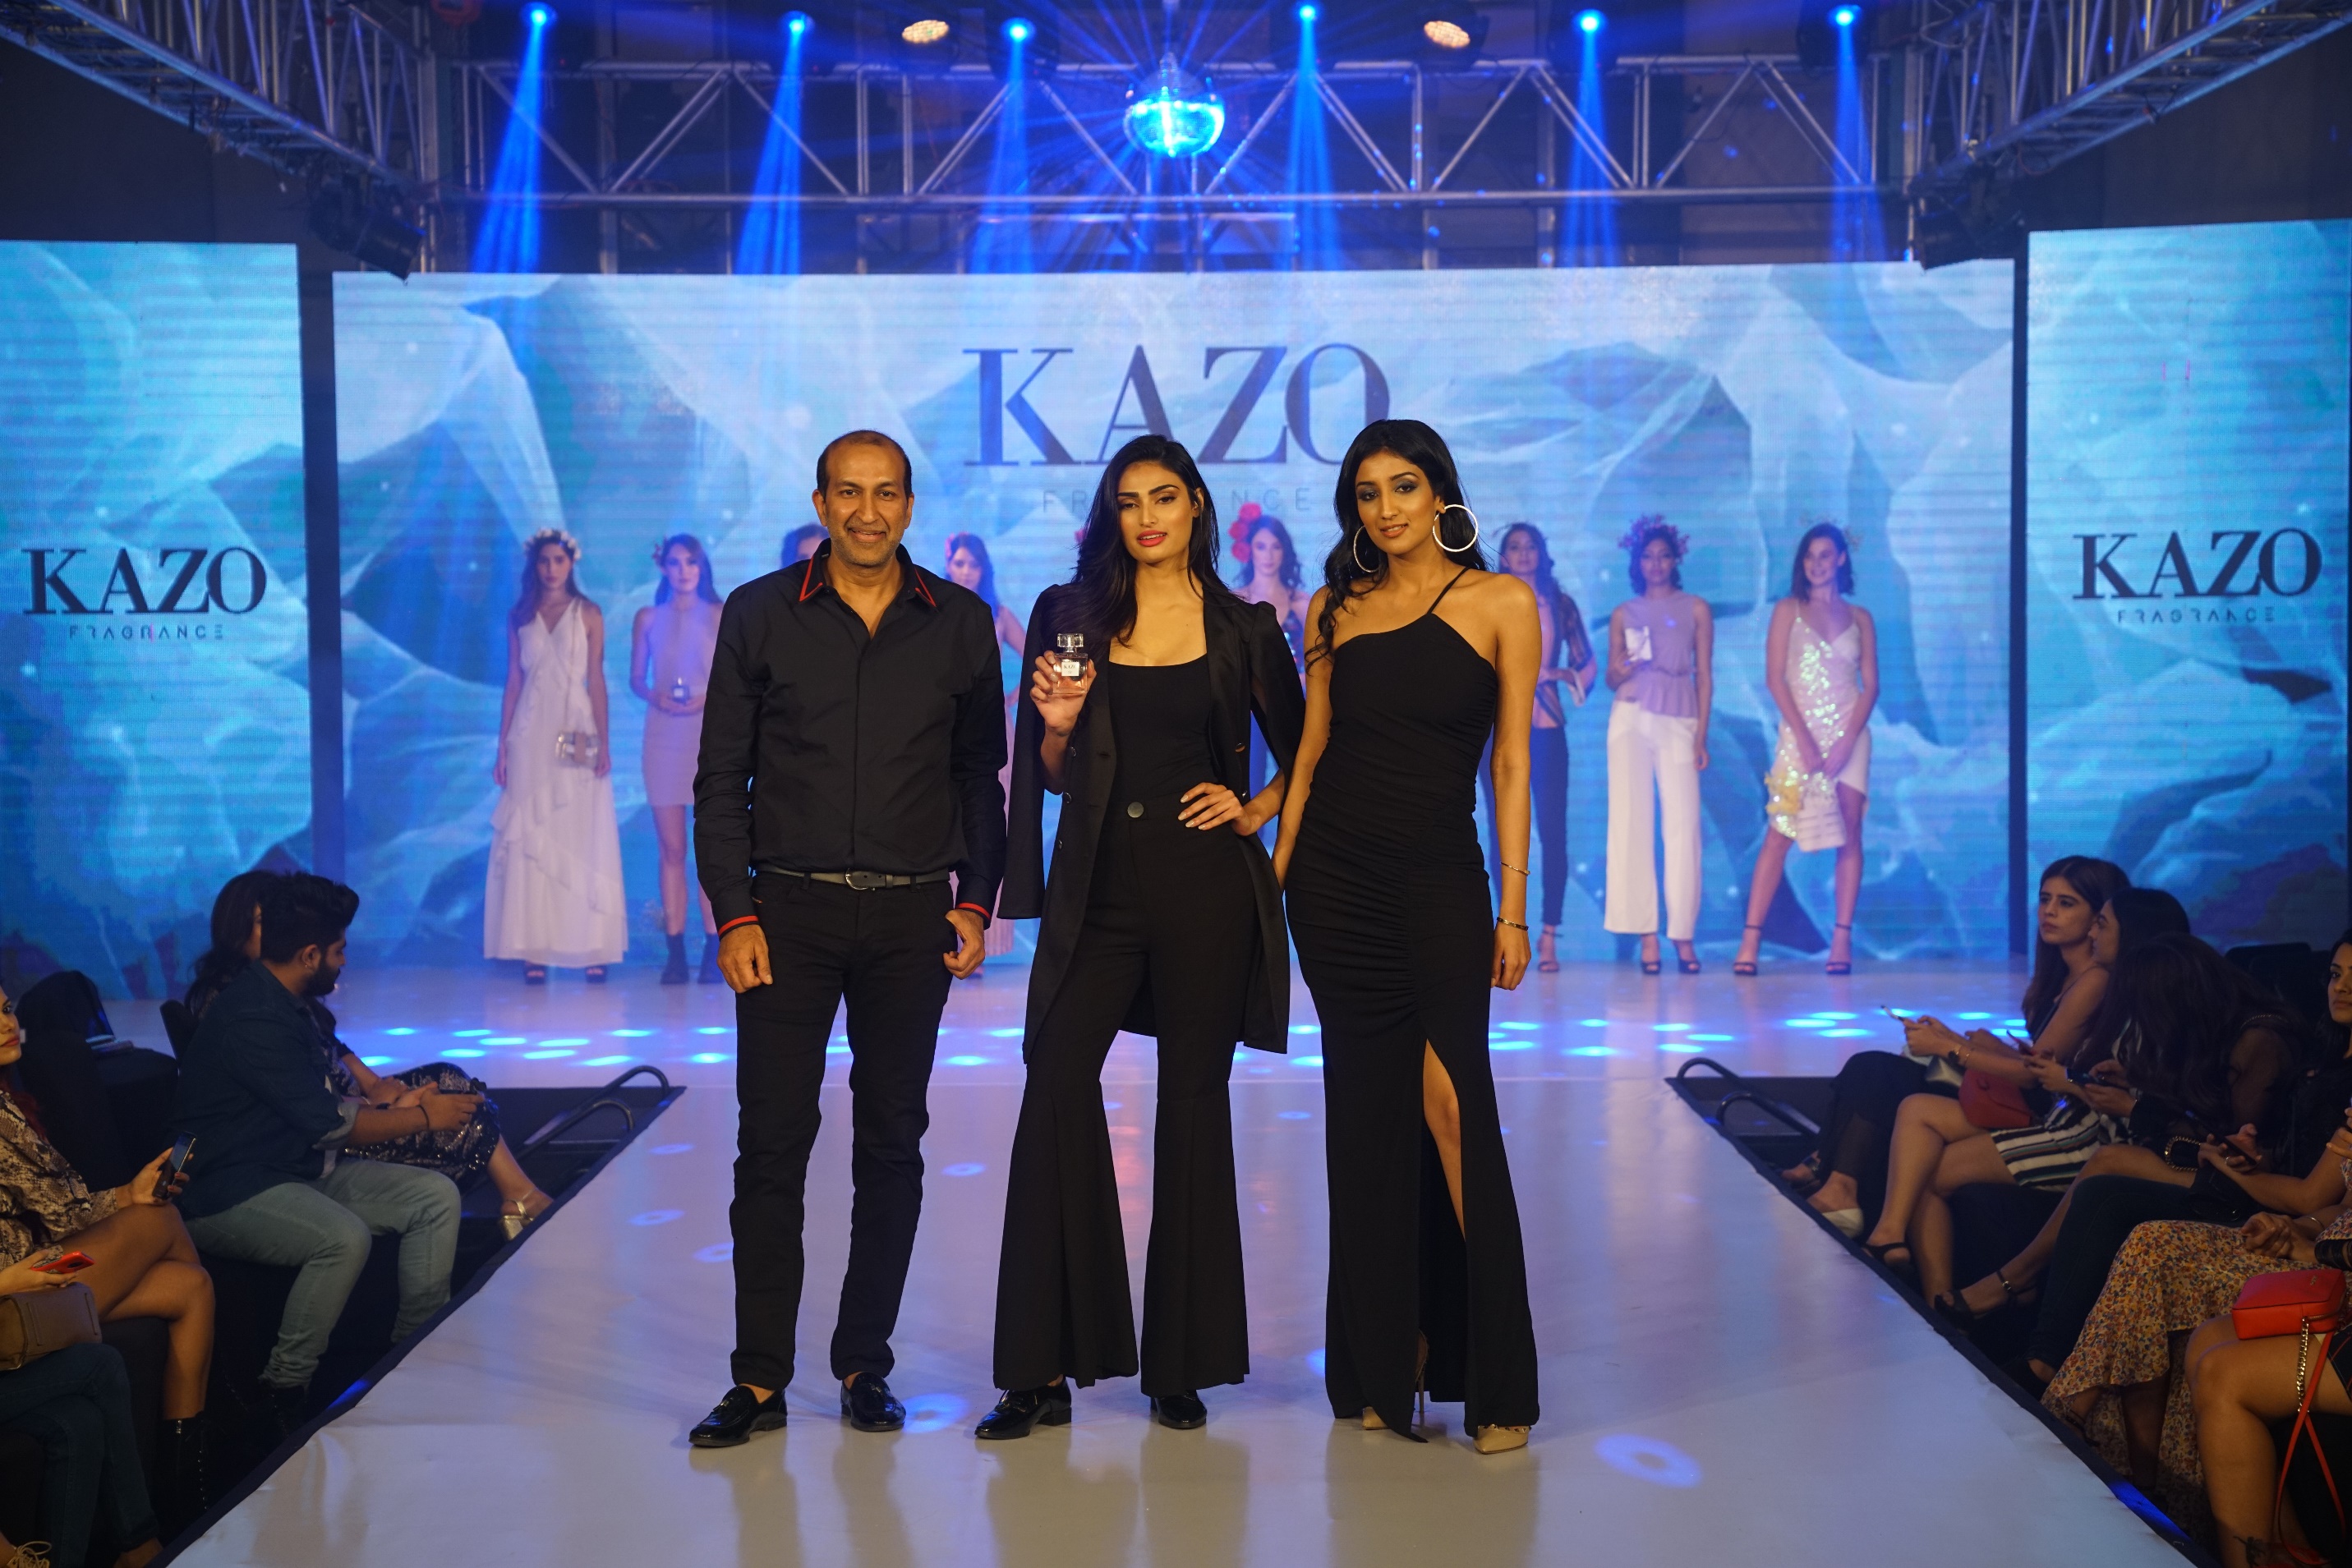 KAZO - A home for latest chic contemporary fashion brings its exclusive